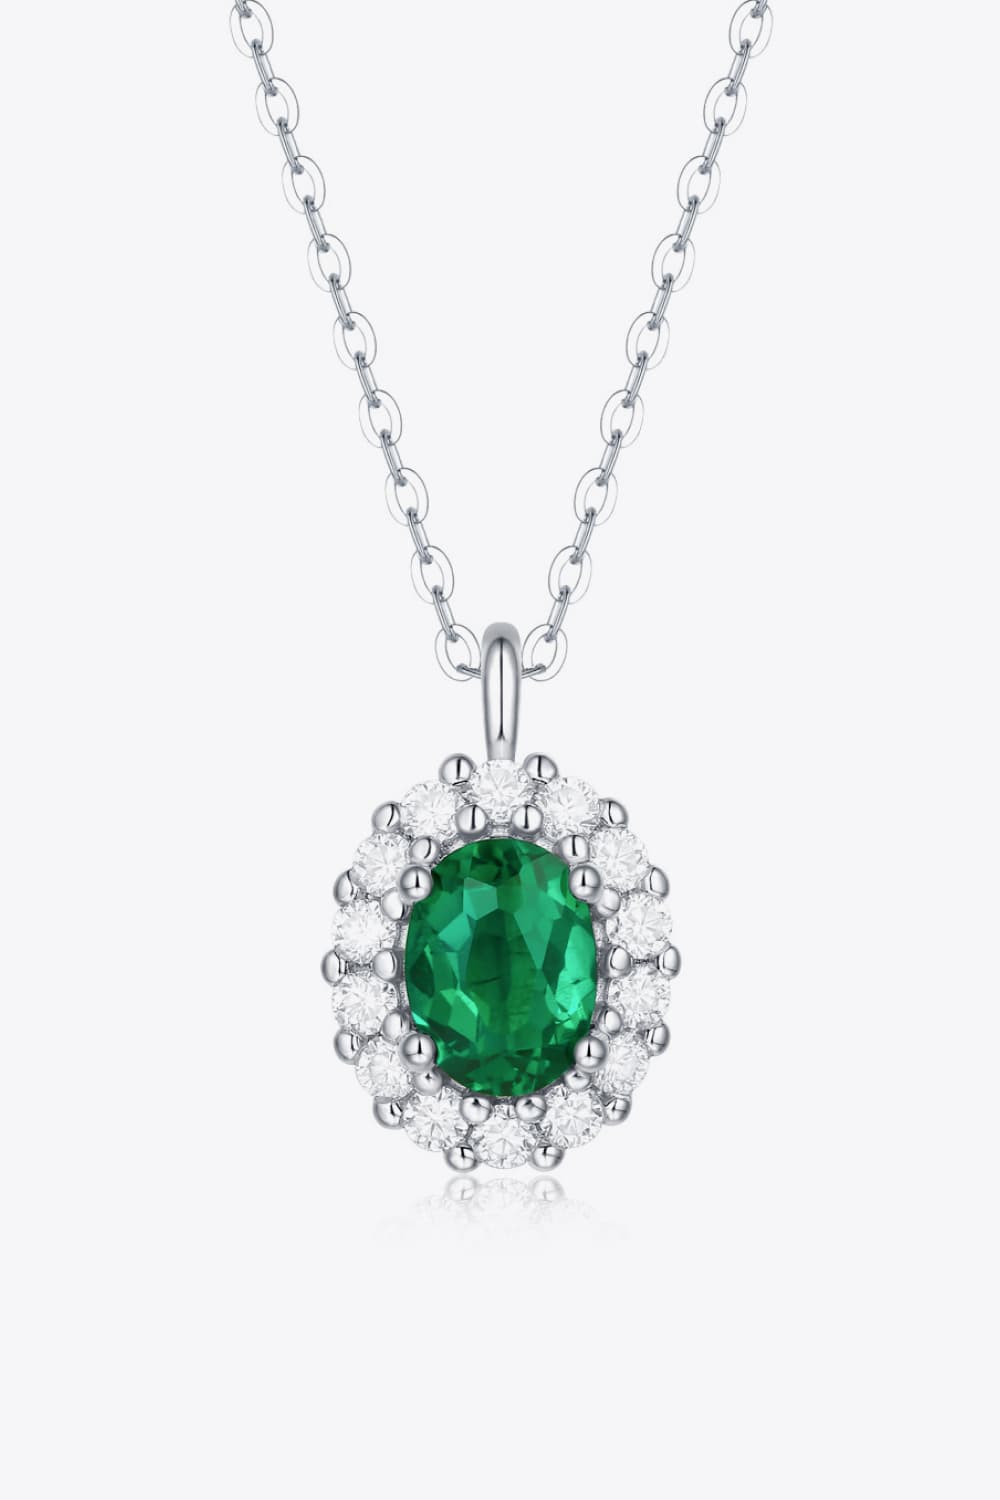 Women’s 1.5 Carat Lab-Grown Emerald 925 Sterling Silver Necklace